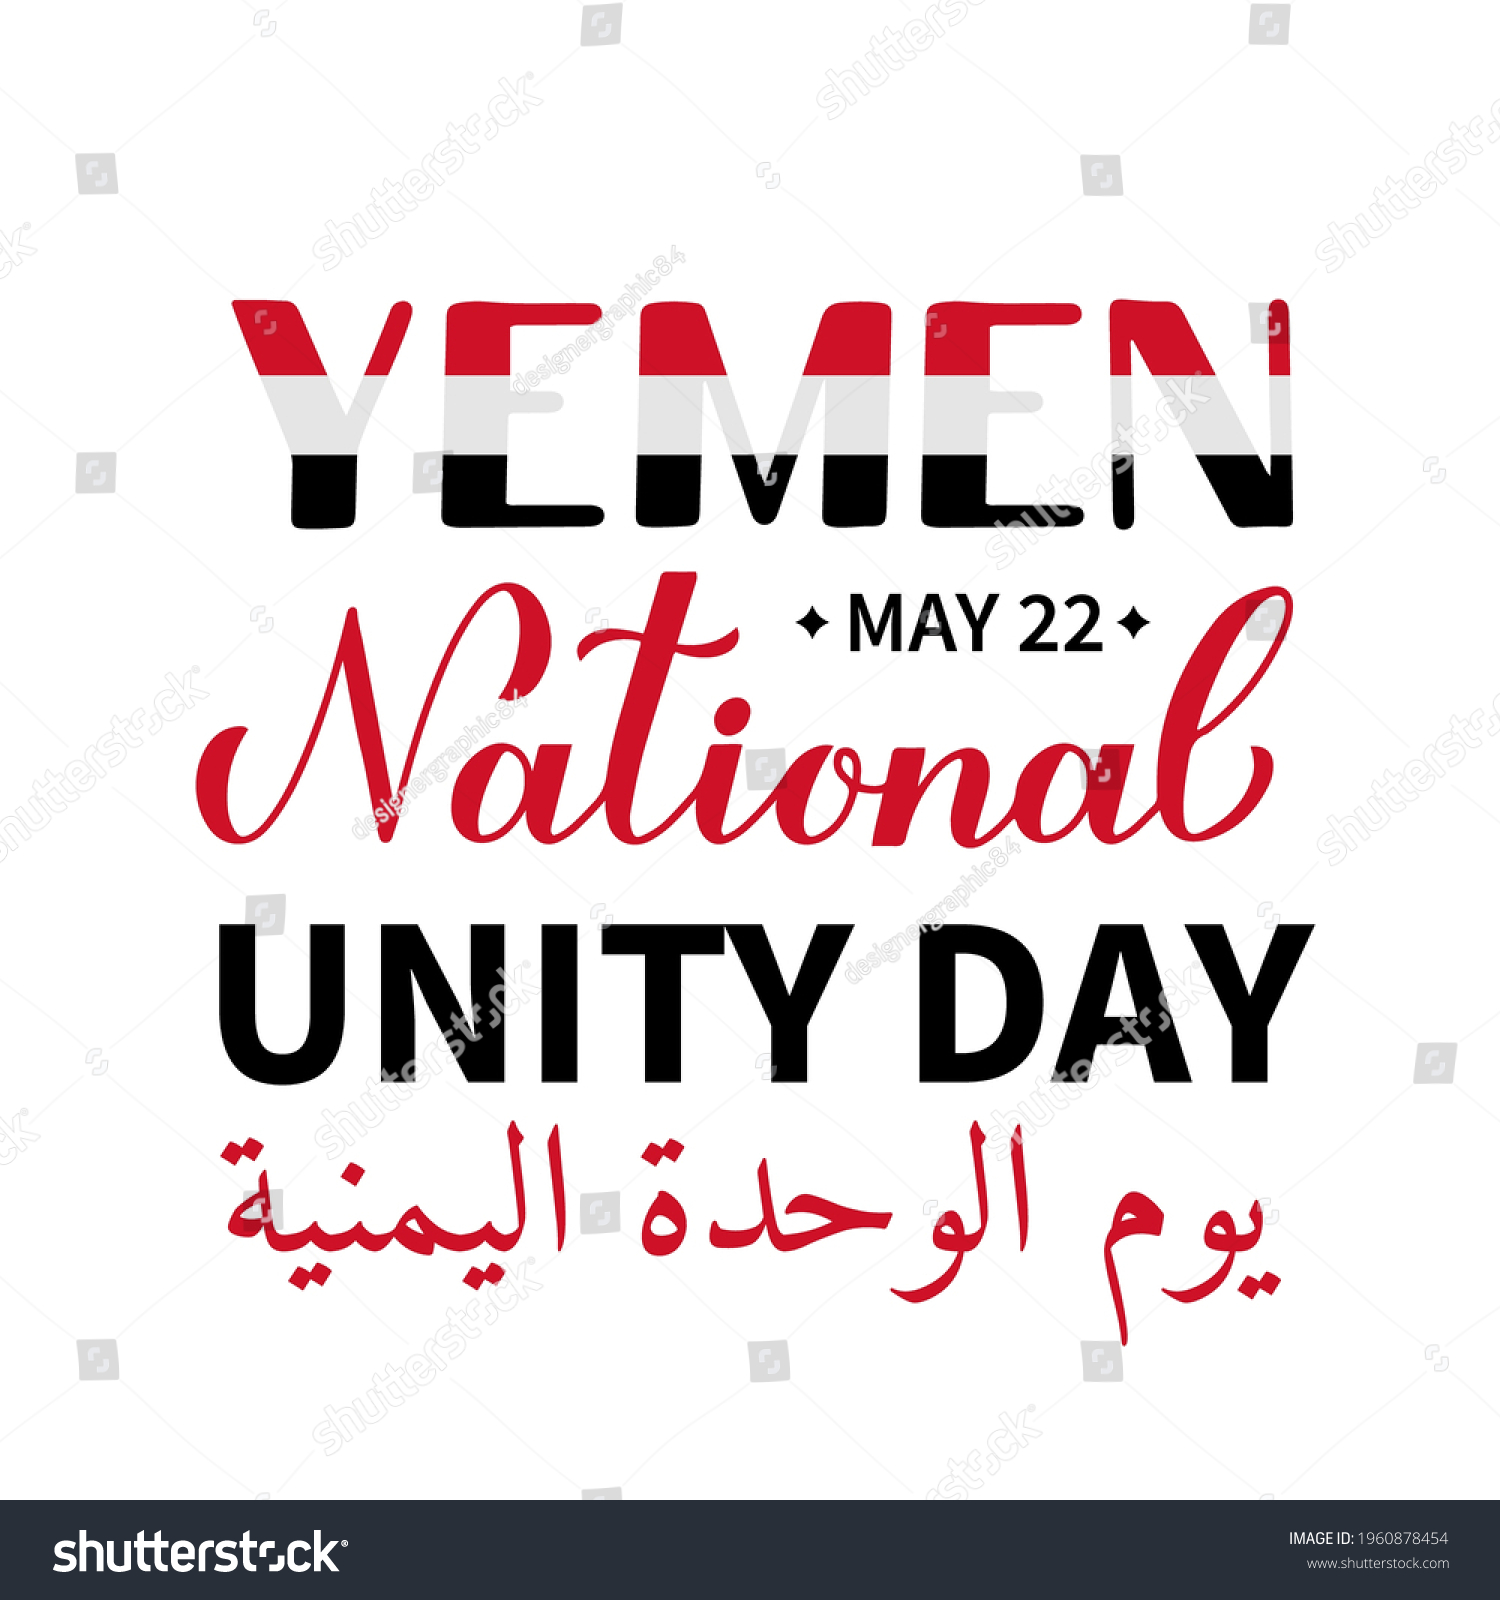 SVG of Yemen Unity Day lettering in English and in Arabian. National holiday celebration on May 22. Vector template for banner, typography poster, flyer, greeting card, etc. svg